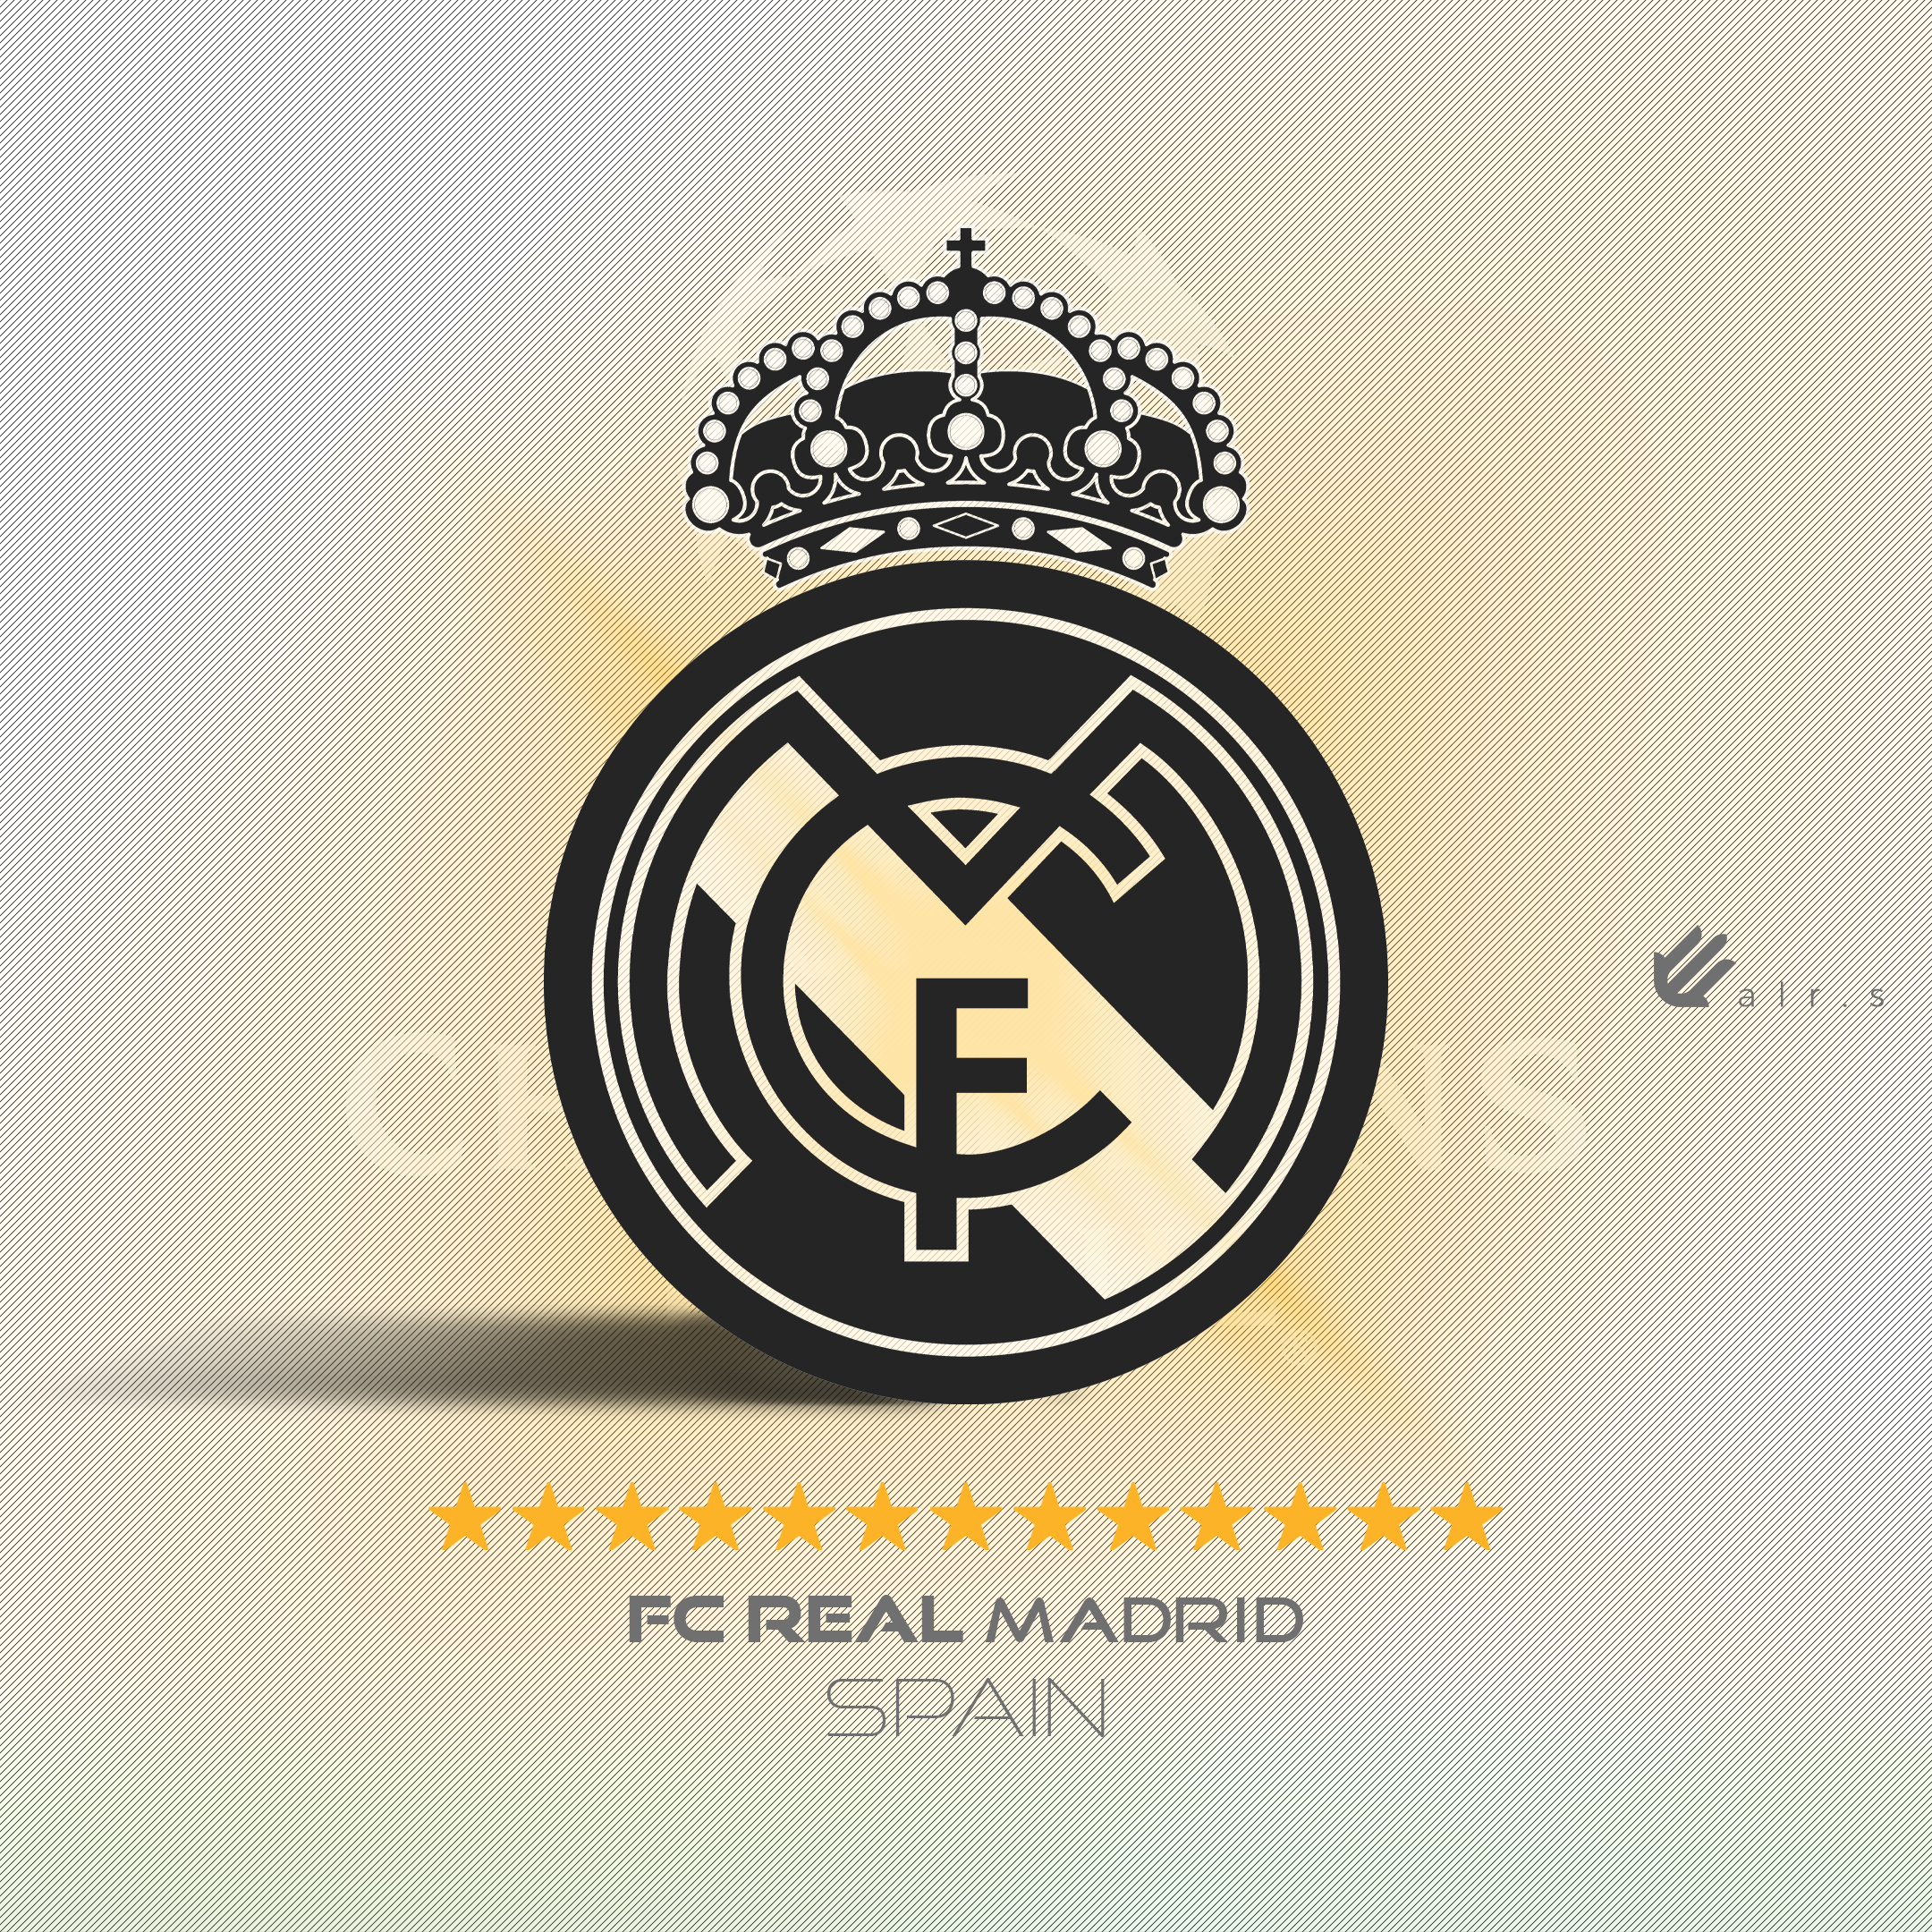 General 2160x2160 Football  Real Madrid logo Champions League clubs graphic design creativity photography colorful soccer sport soccer clubs